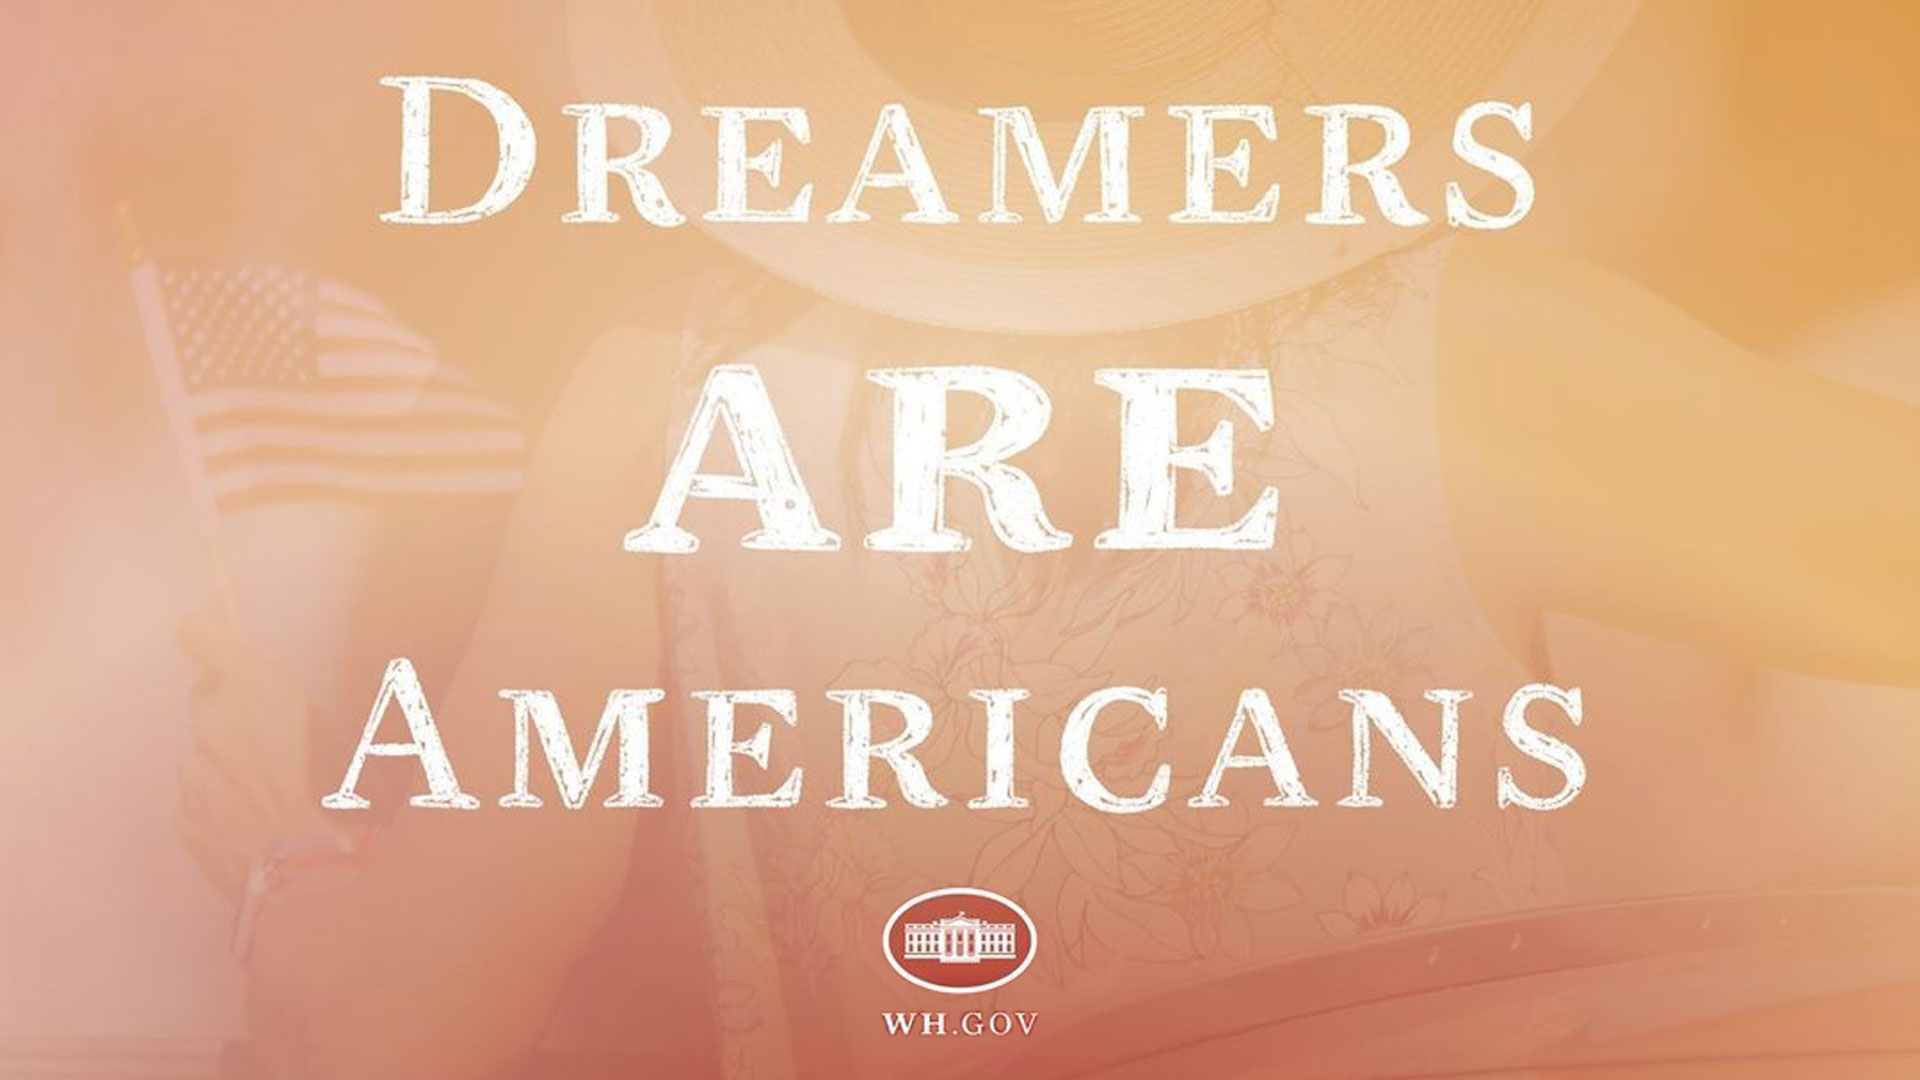 Dreamers ARE Americans